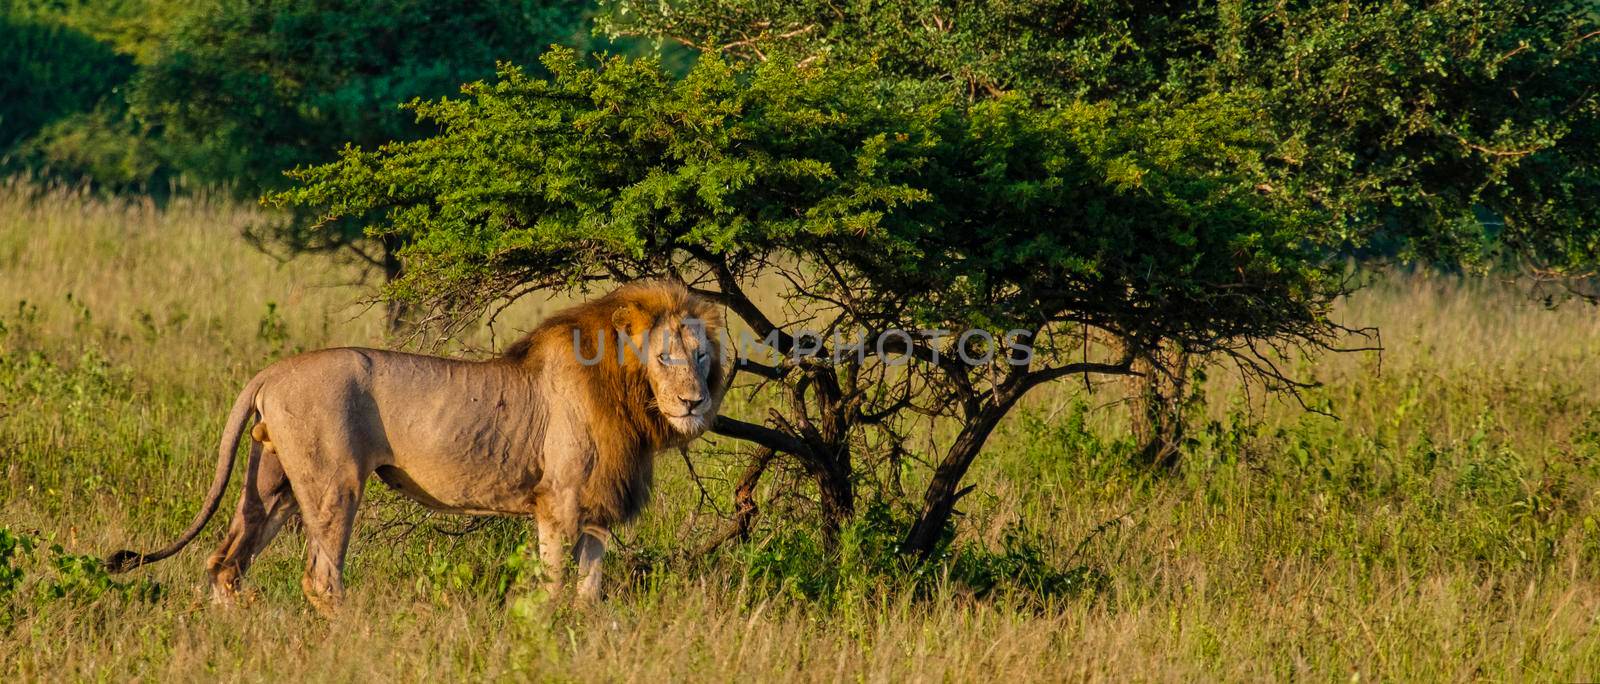 Lion male and female pairing during sunset in South Africa Thanda Game reserve Kwazulu Natal by fokkebok